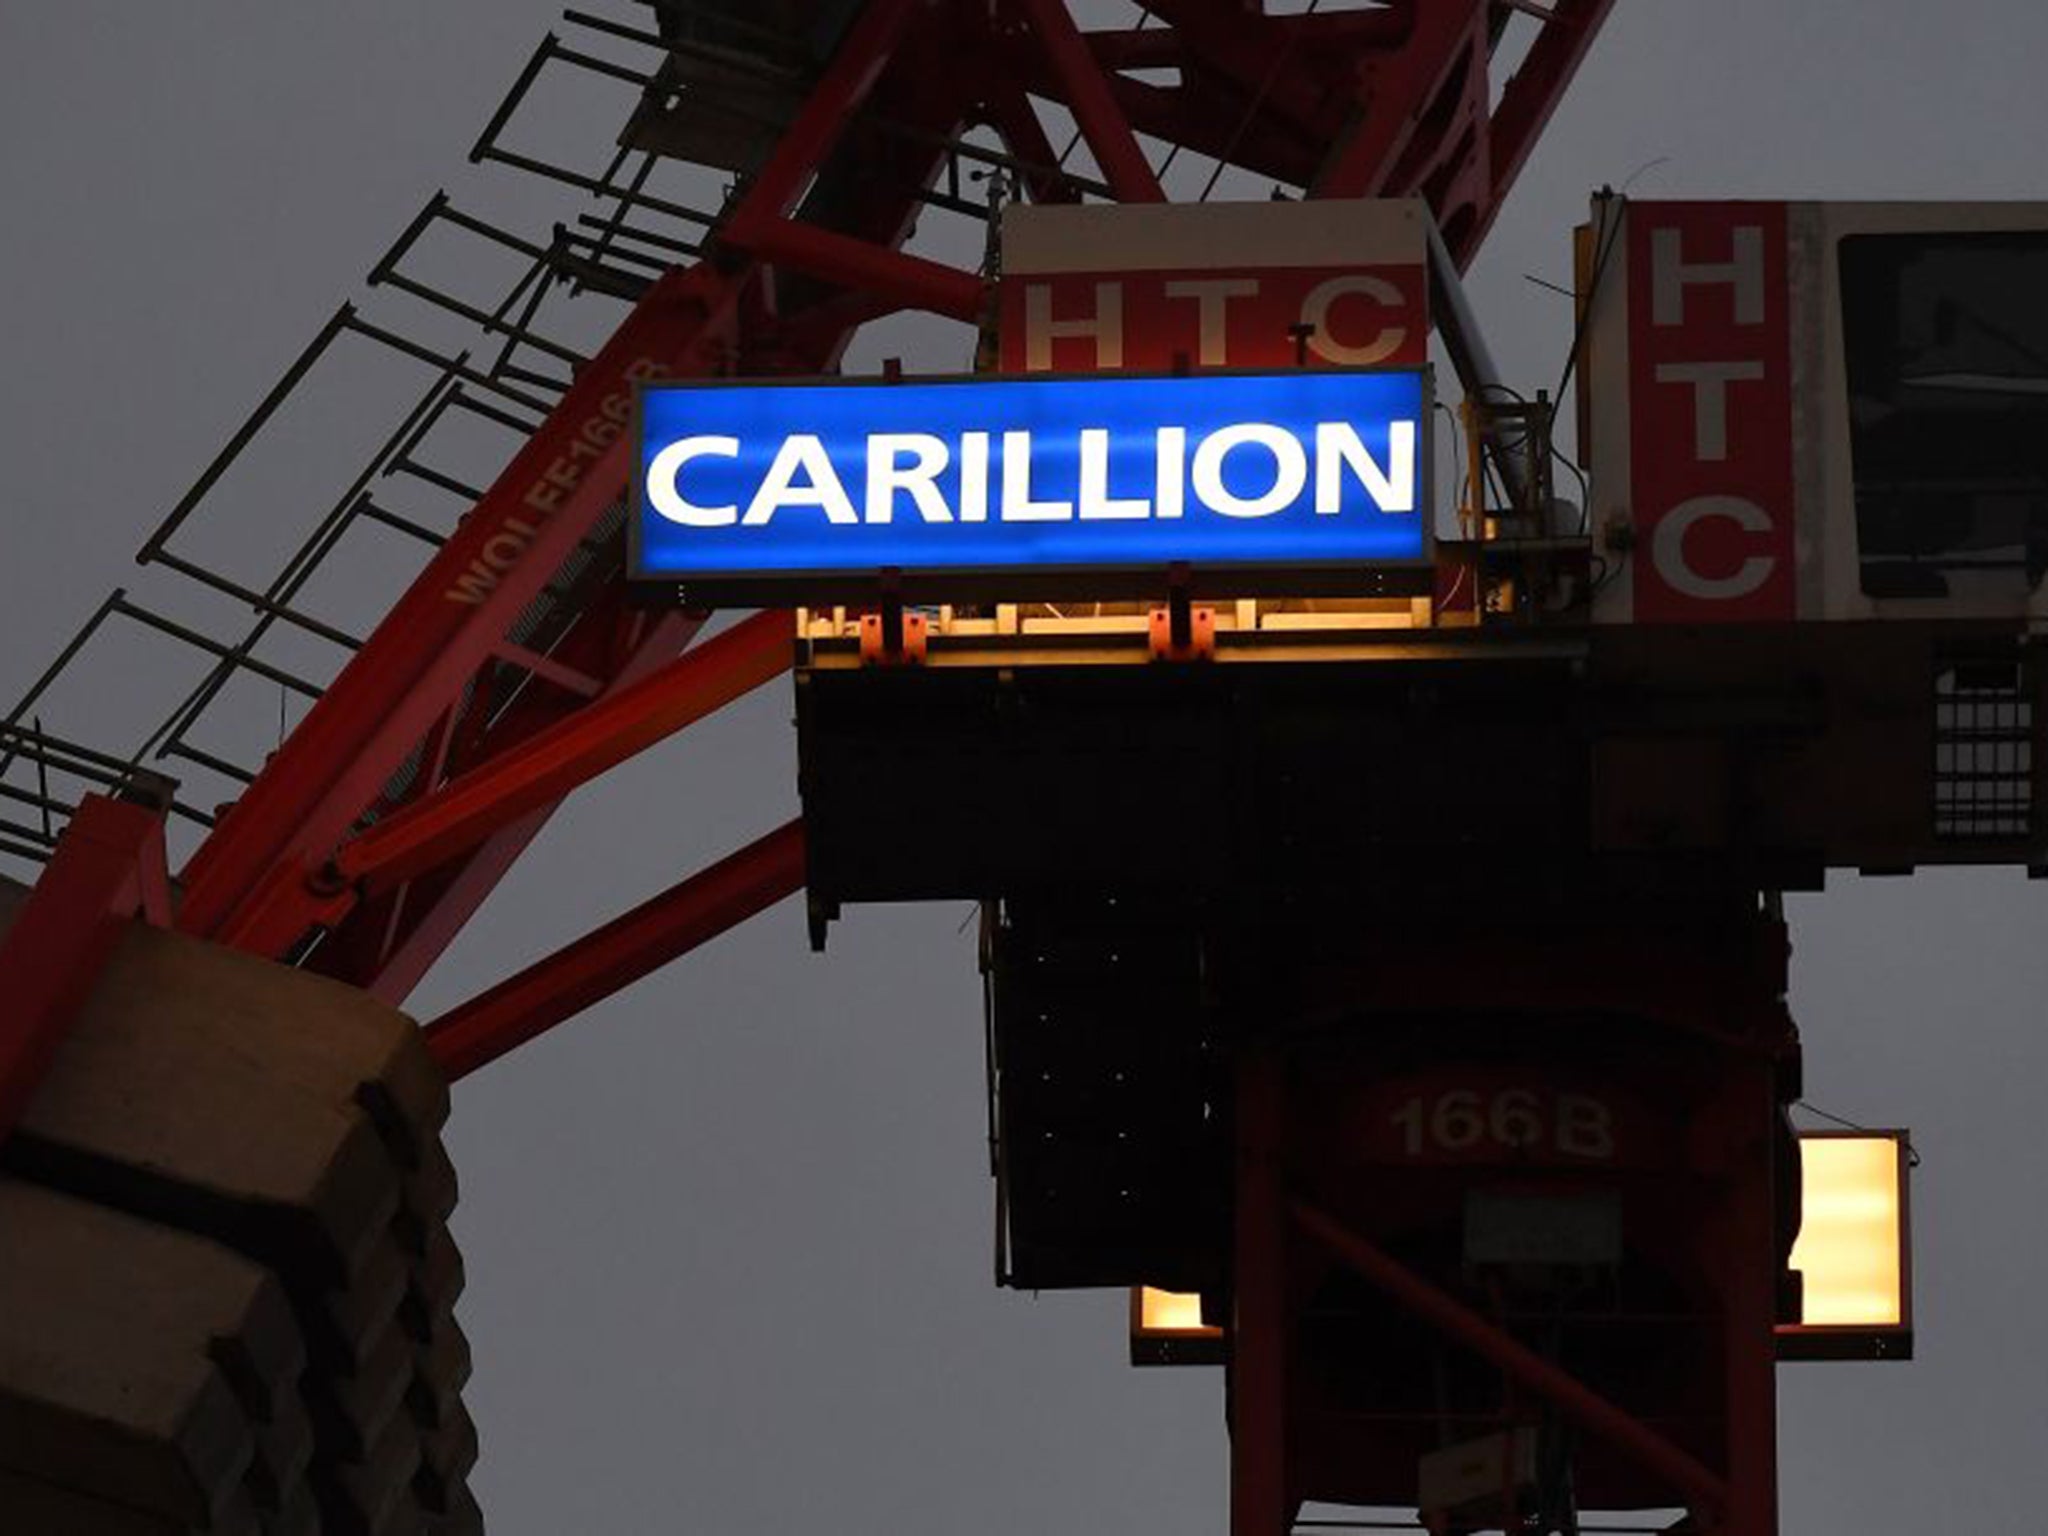 Lloyds and Nationwide announced rescue measures for firms hit by the collapse of Carillion